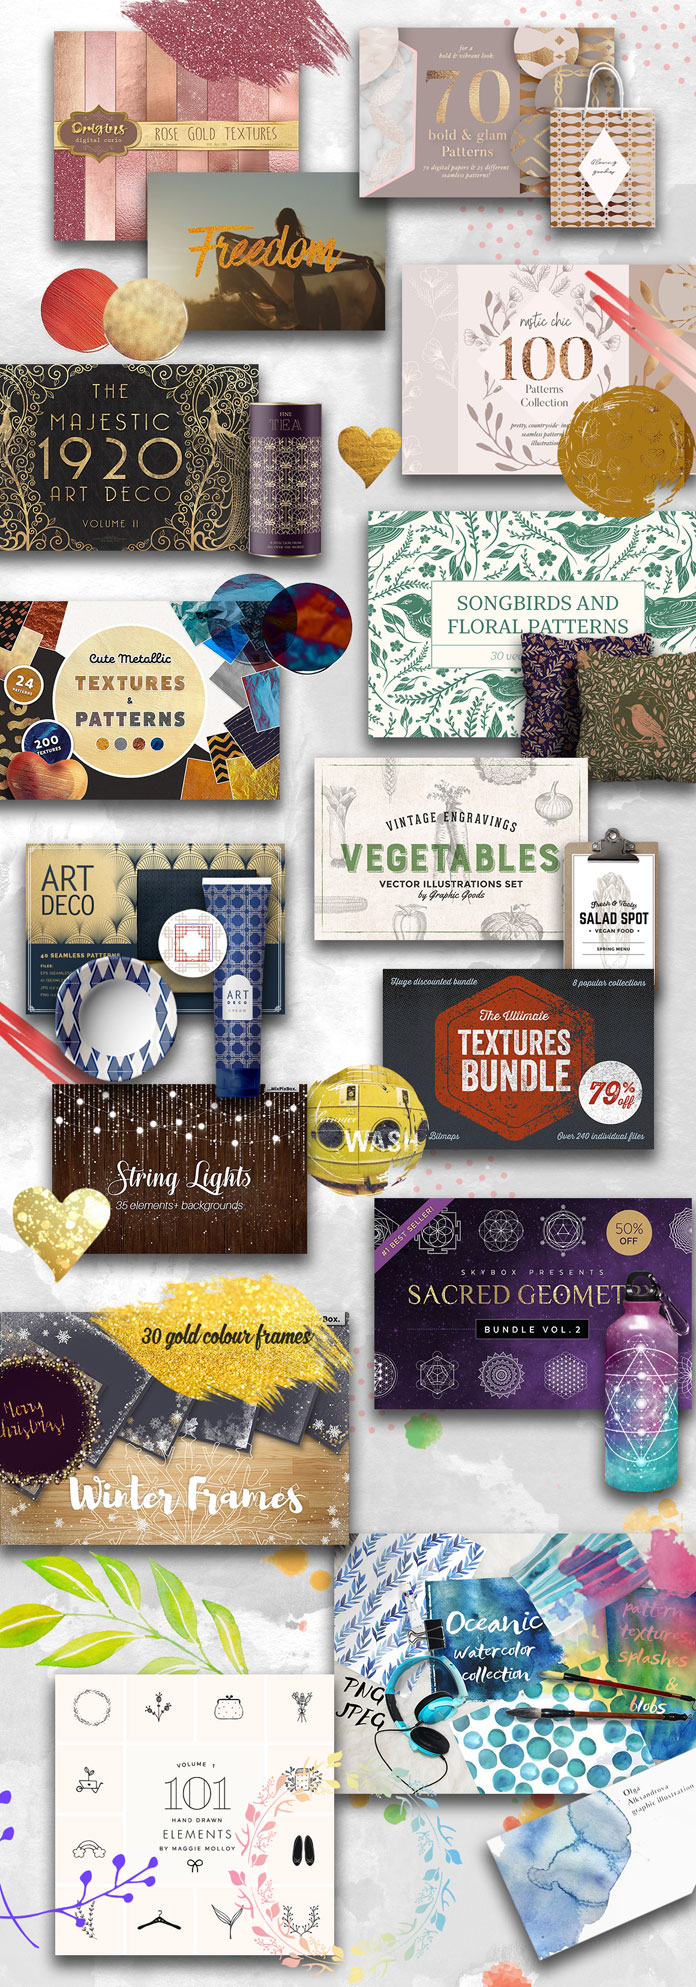 November Design Bundle from Pixelo with 3038 graphic elements plus commercial license.